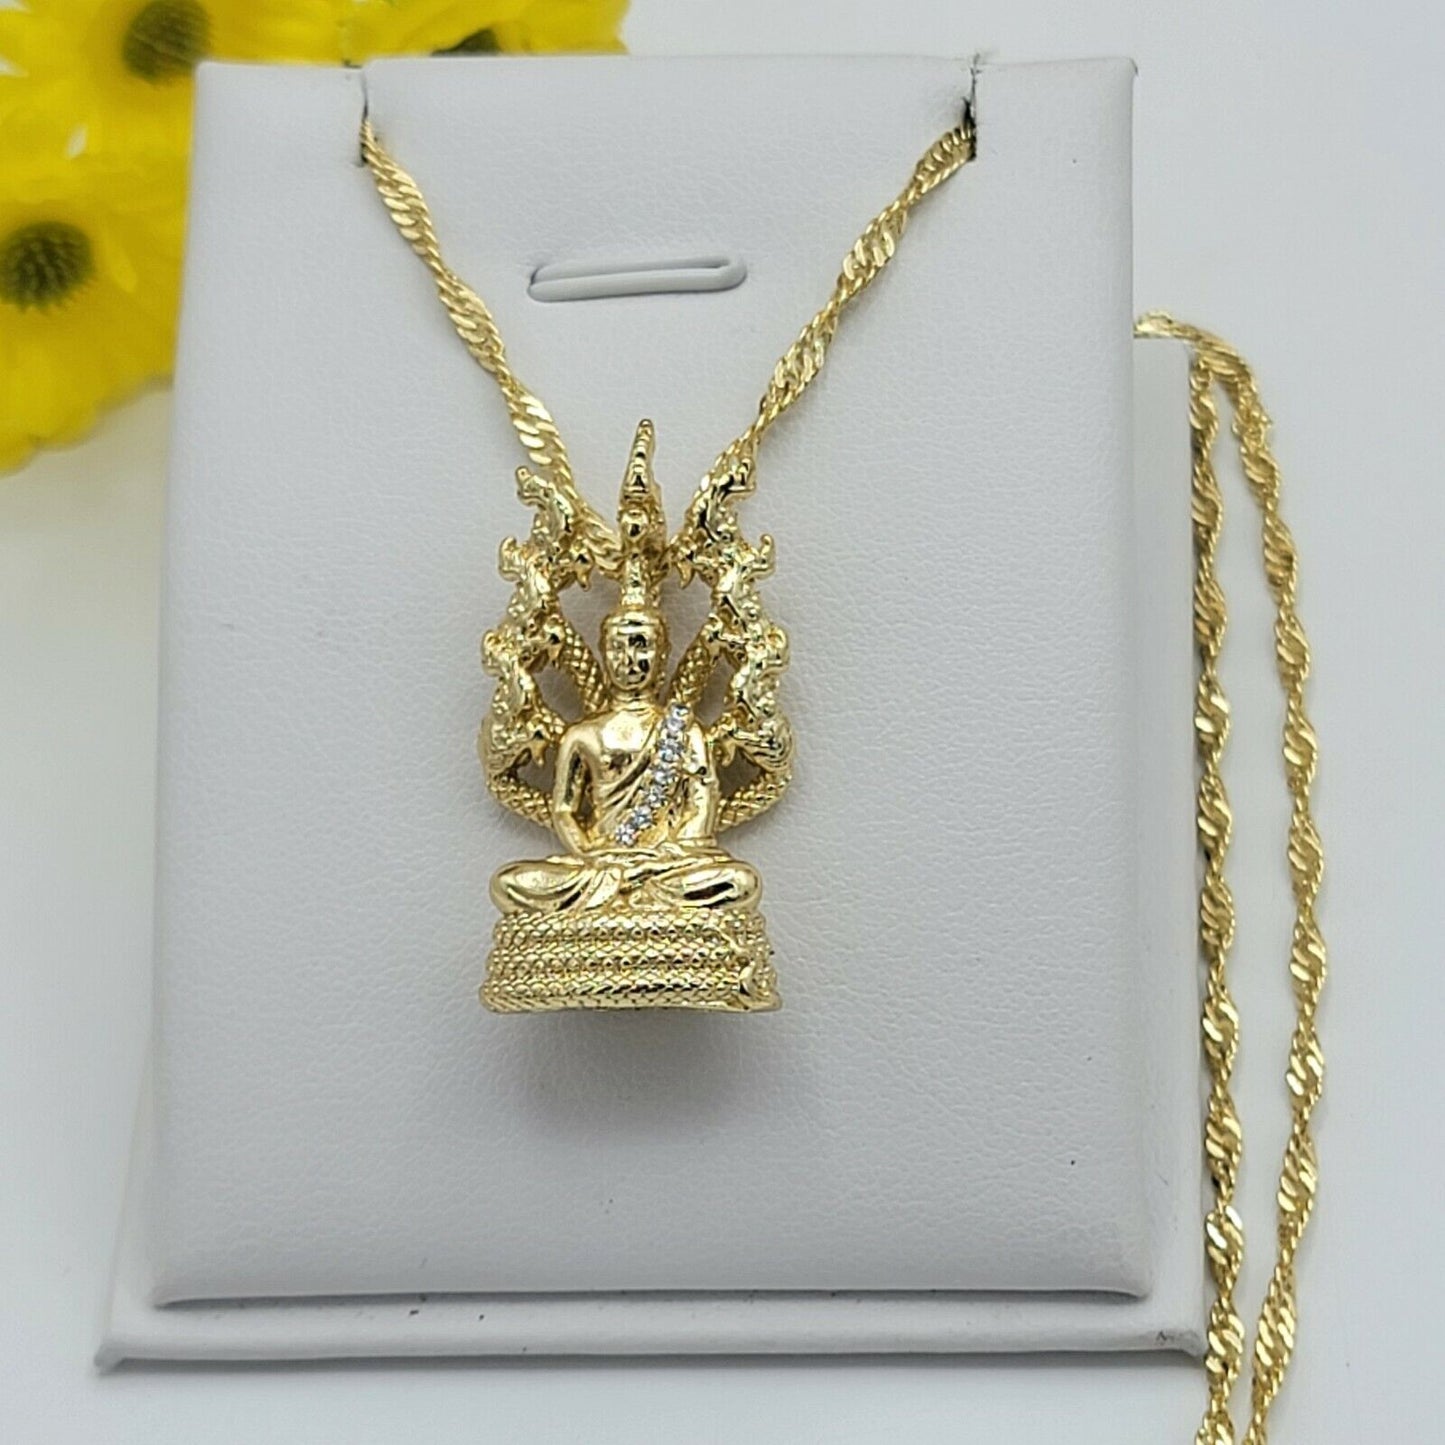 Necklaces - 14K Gold Plated. Buddha Statue Pendant & Chain.